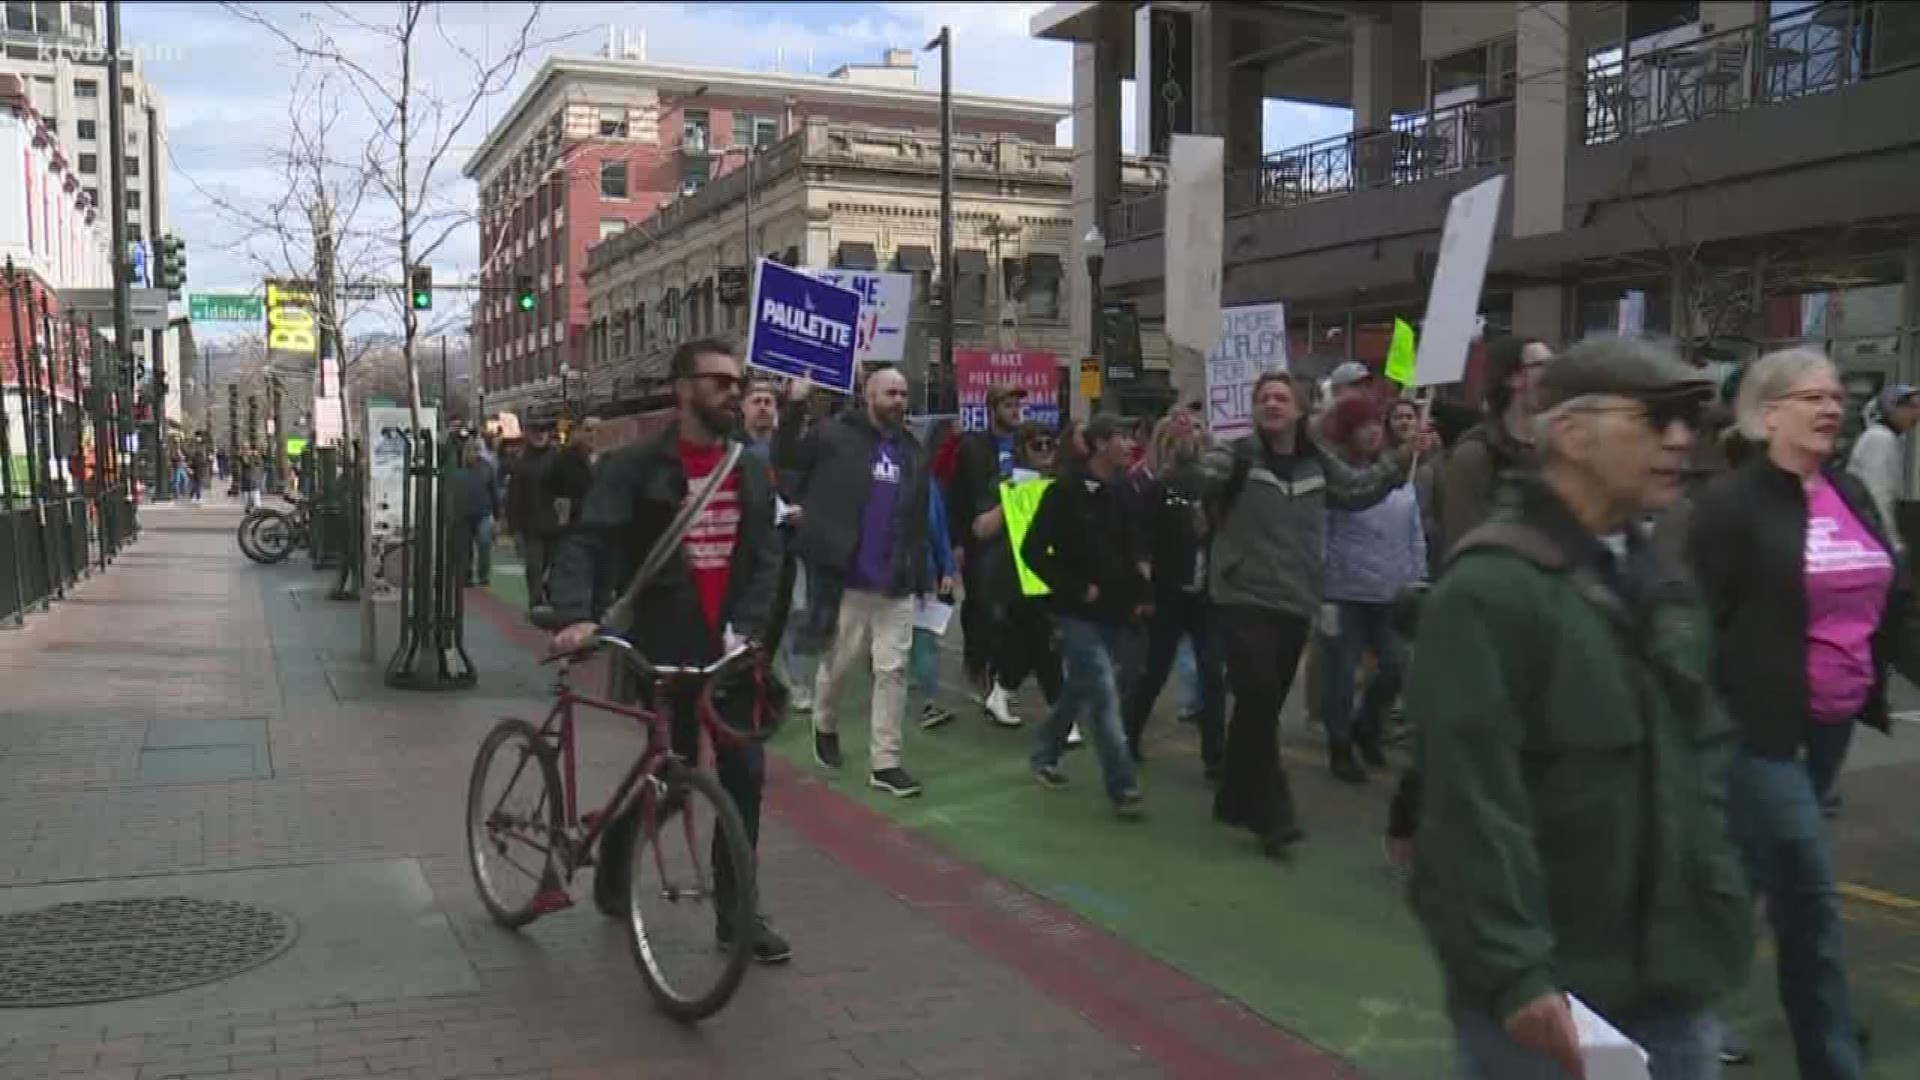 Supporters of Sanders' campaign spent their Saturday showing support for the Democratic presidential candidate in downtown Boise.